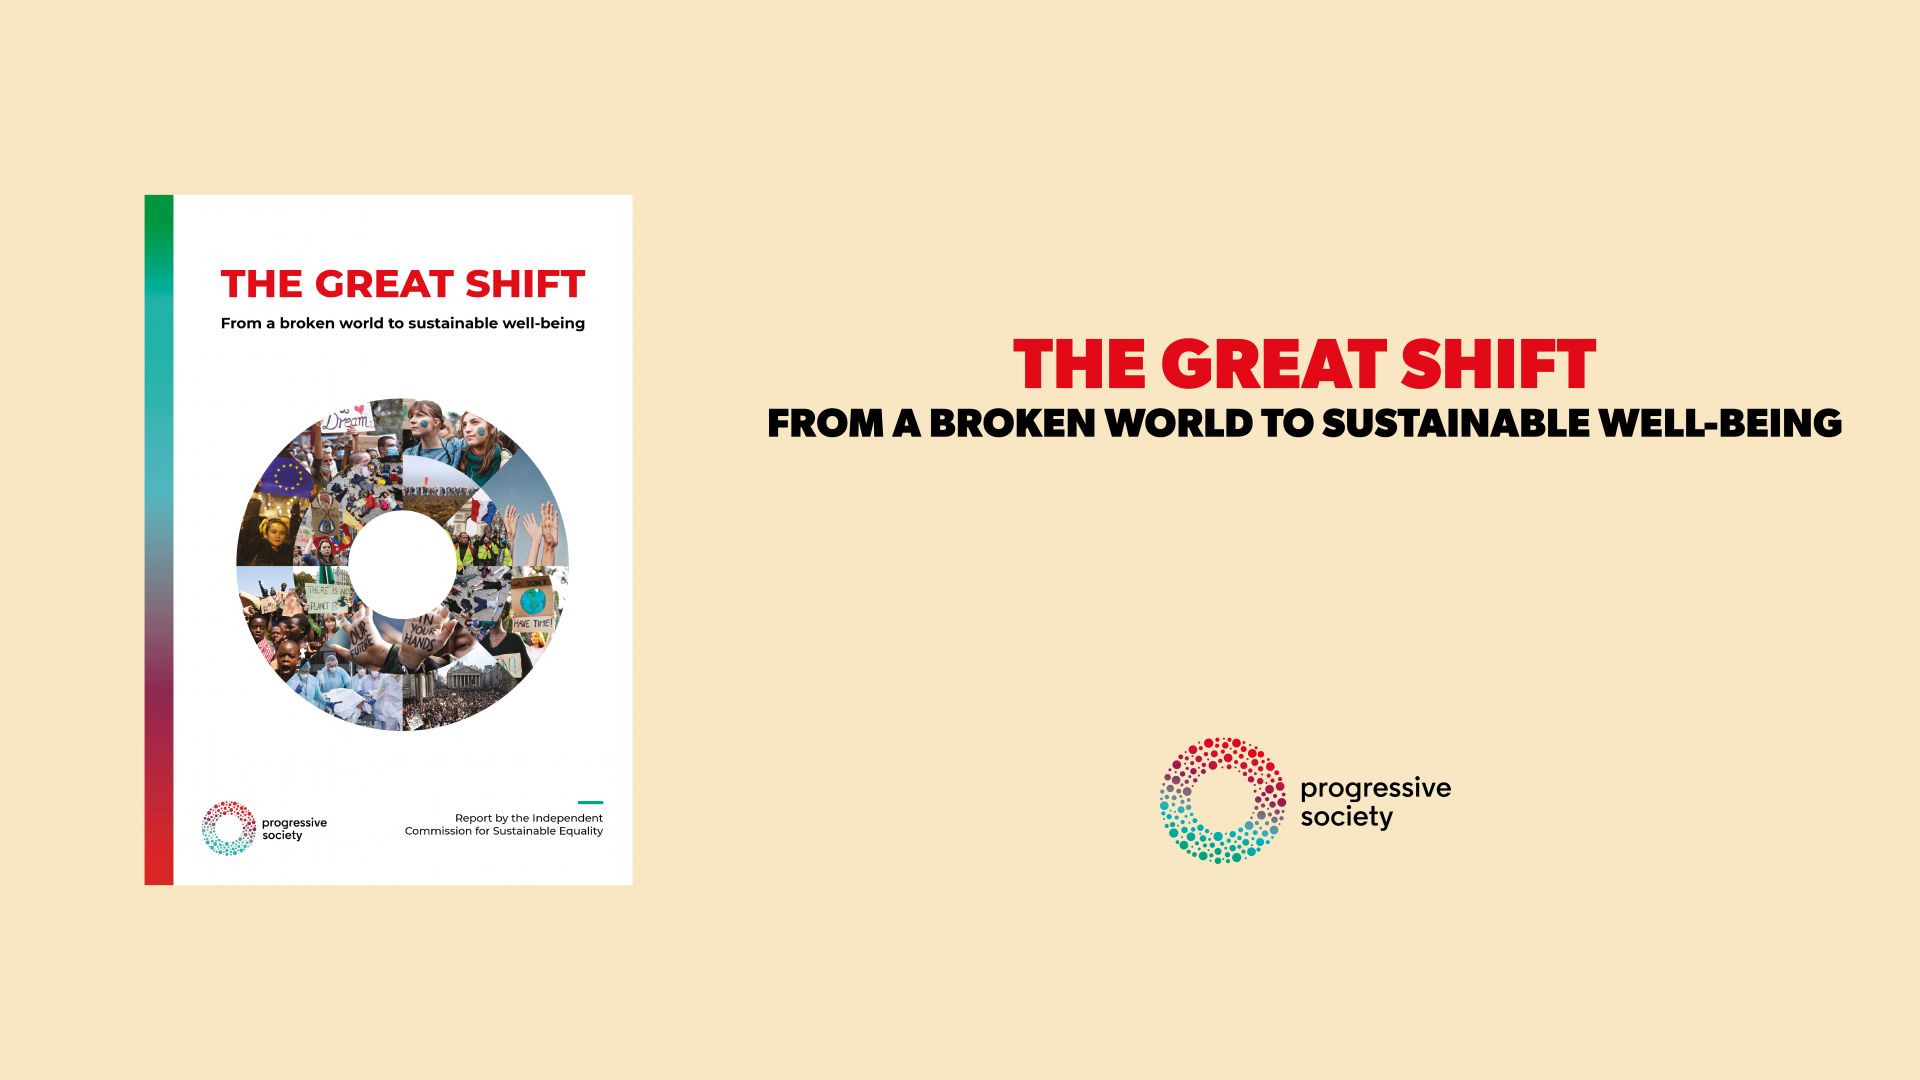 THE GREAT SHIFT - From a broken world to sustainable well-being